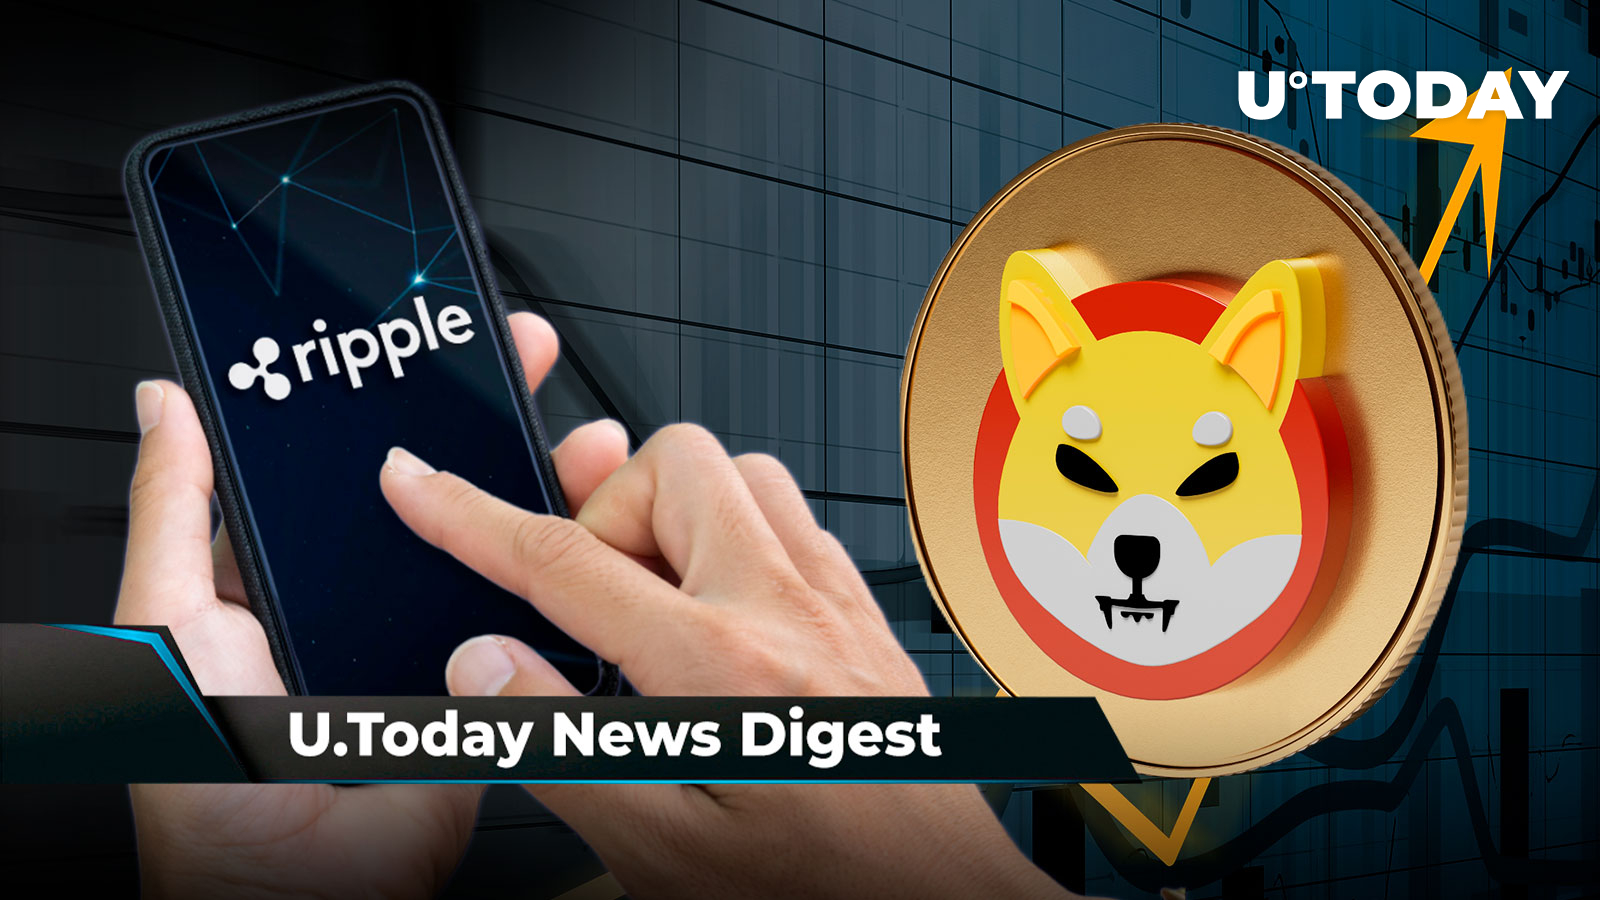 e-smitty-says-xrp-might-hit-five-digits-shib-trading-volume-jumps-30-two-major-market-players-to-support-ripple-in-sec-case-crypto-news-digest-by-u-today